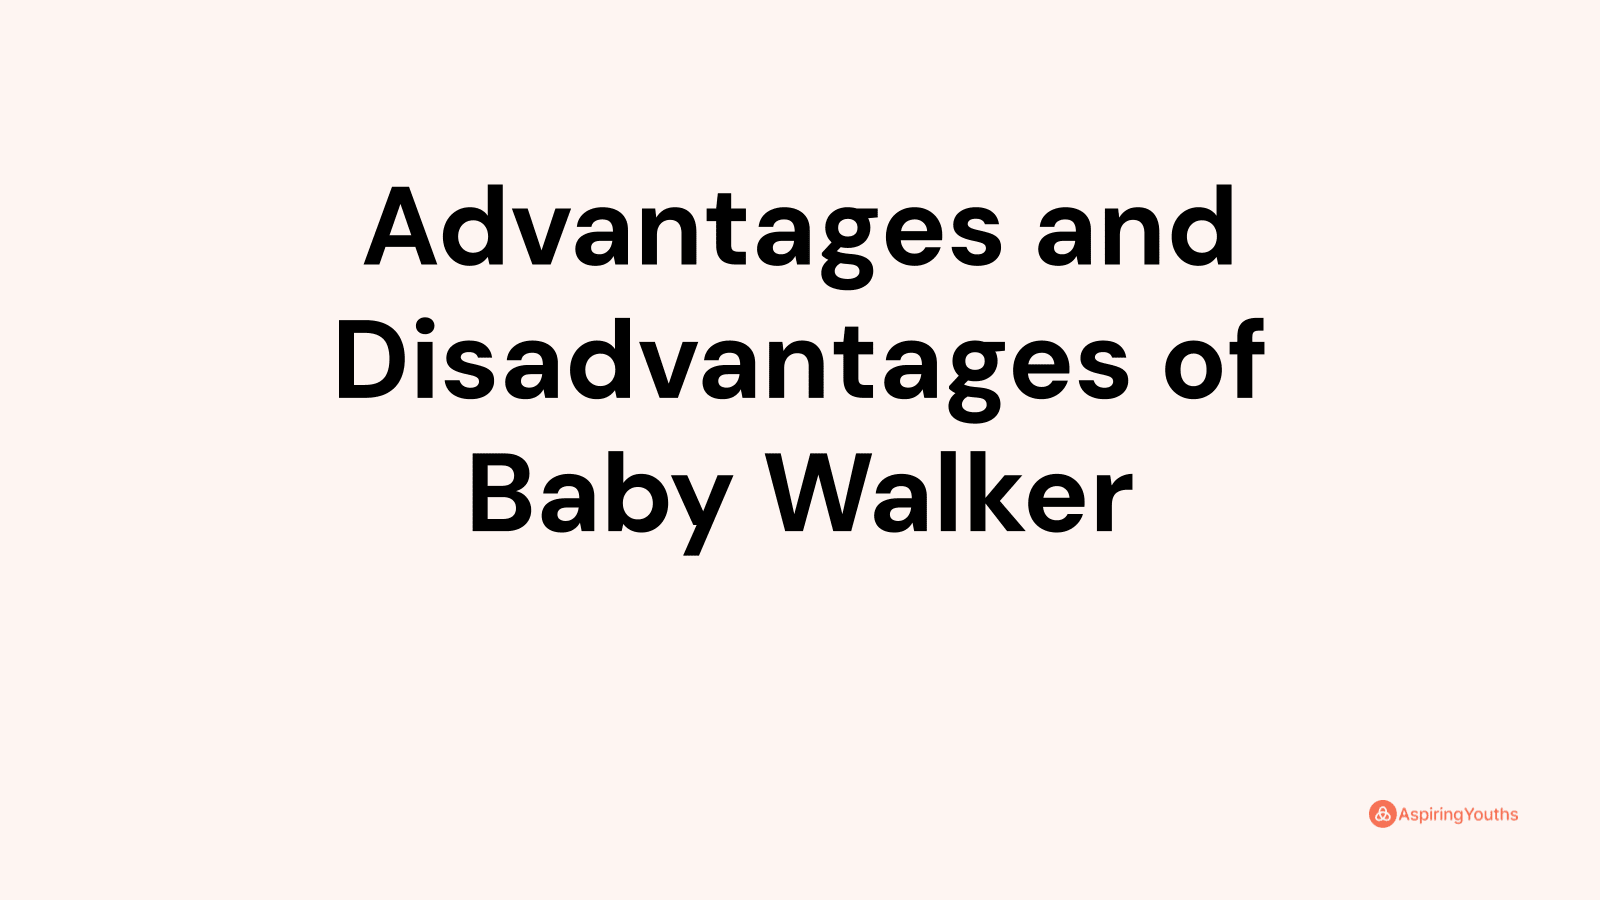 Advantages and disadvantages of Baby Walker